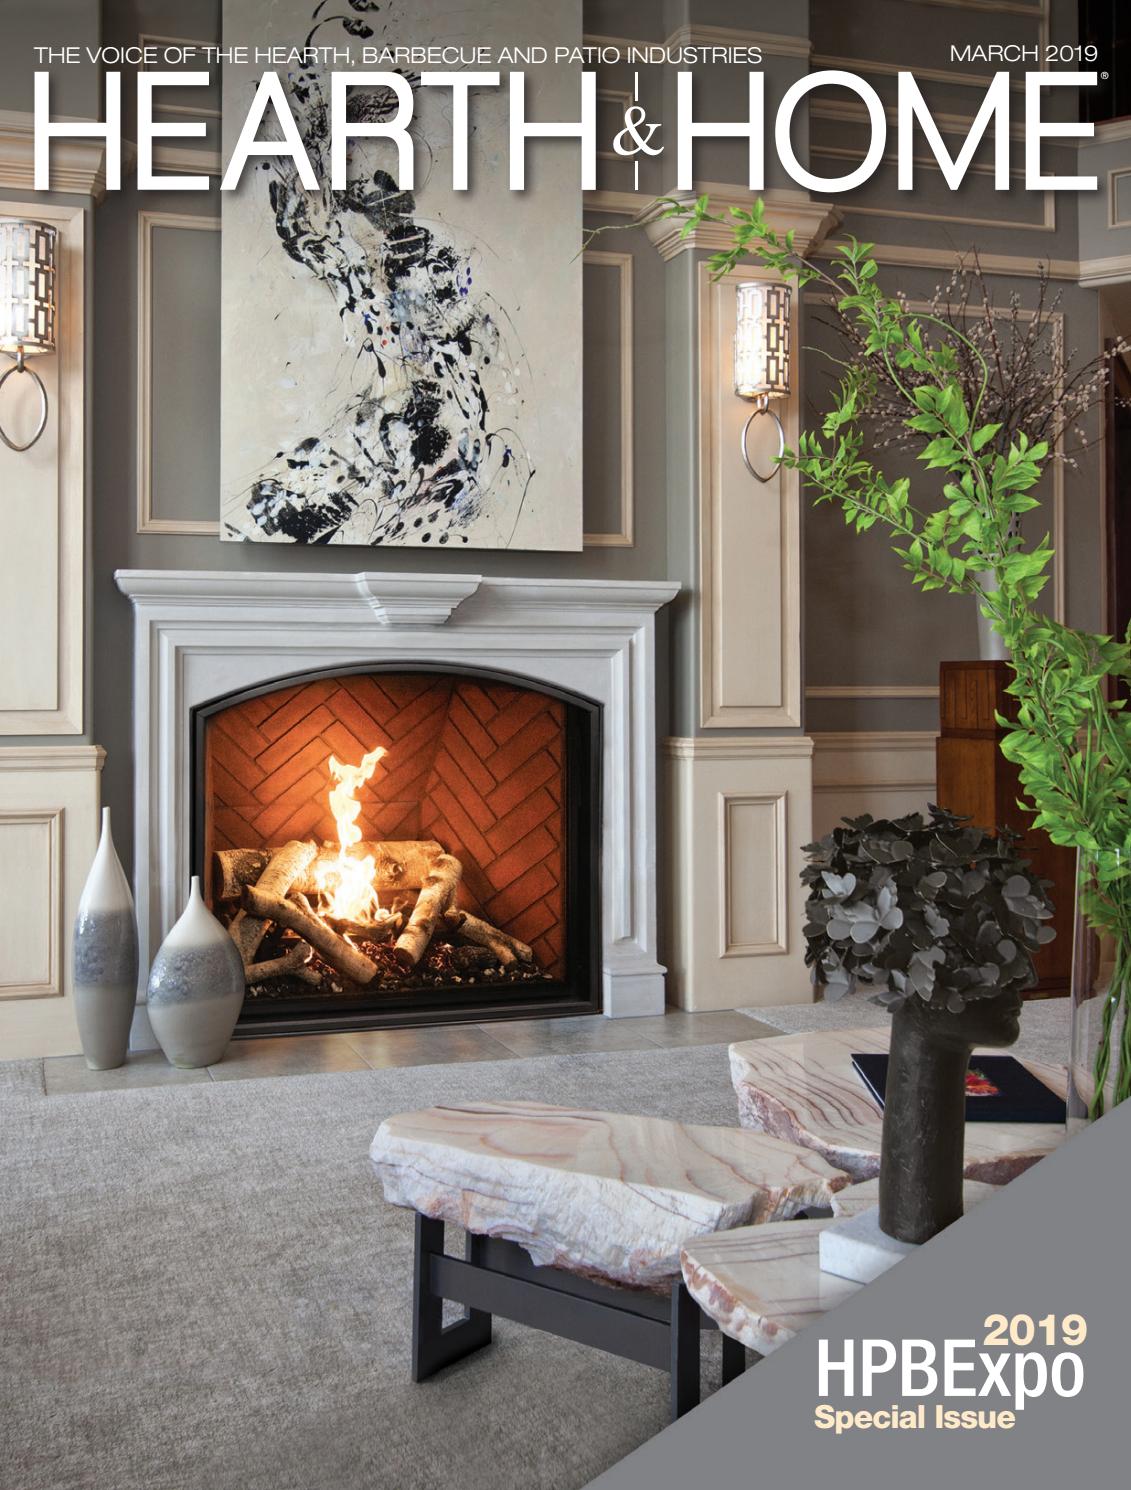 Linear Vent Free Gas Fireplace Awesome Hearth & Home Magazine – 2019 March issue by Hearth & Home